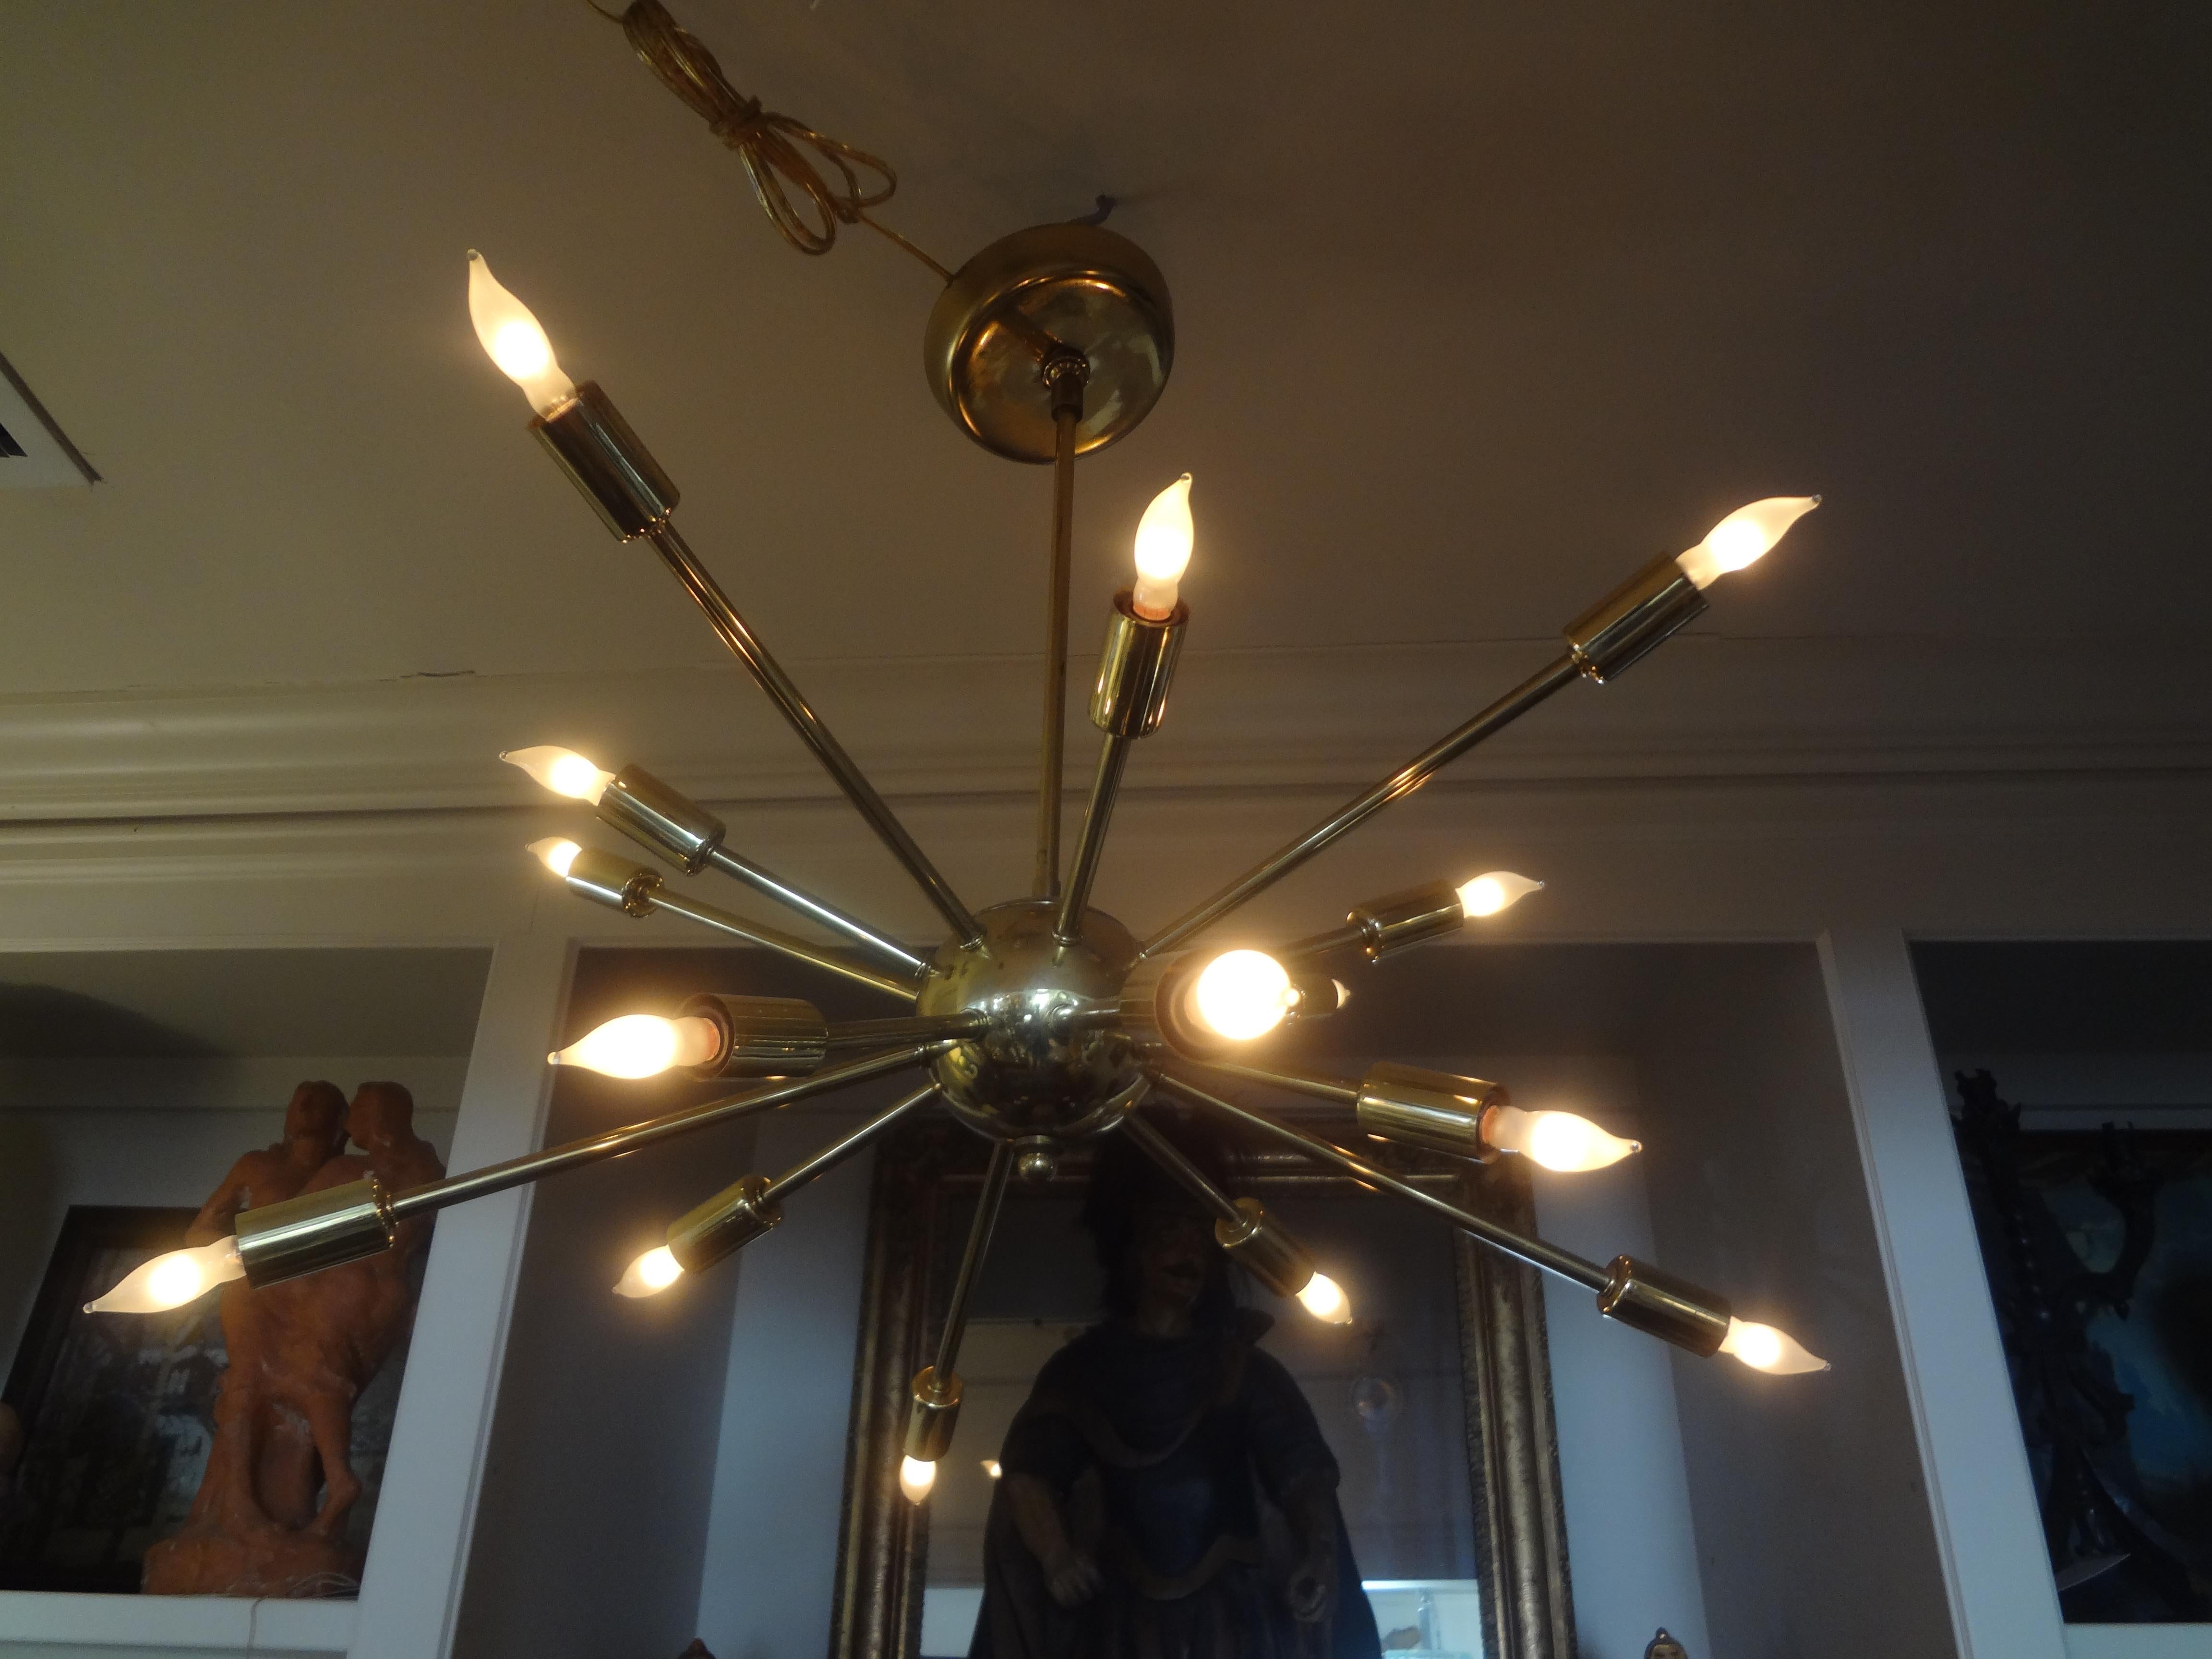 Italian midcentury brass sputnik chandelier. Our 16 arm Italian polished brass sputnik chandelier has been newly wired to U.S. Standards with American sockets and extra lead wire and retains the original canopy.